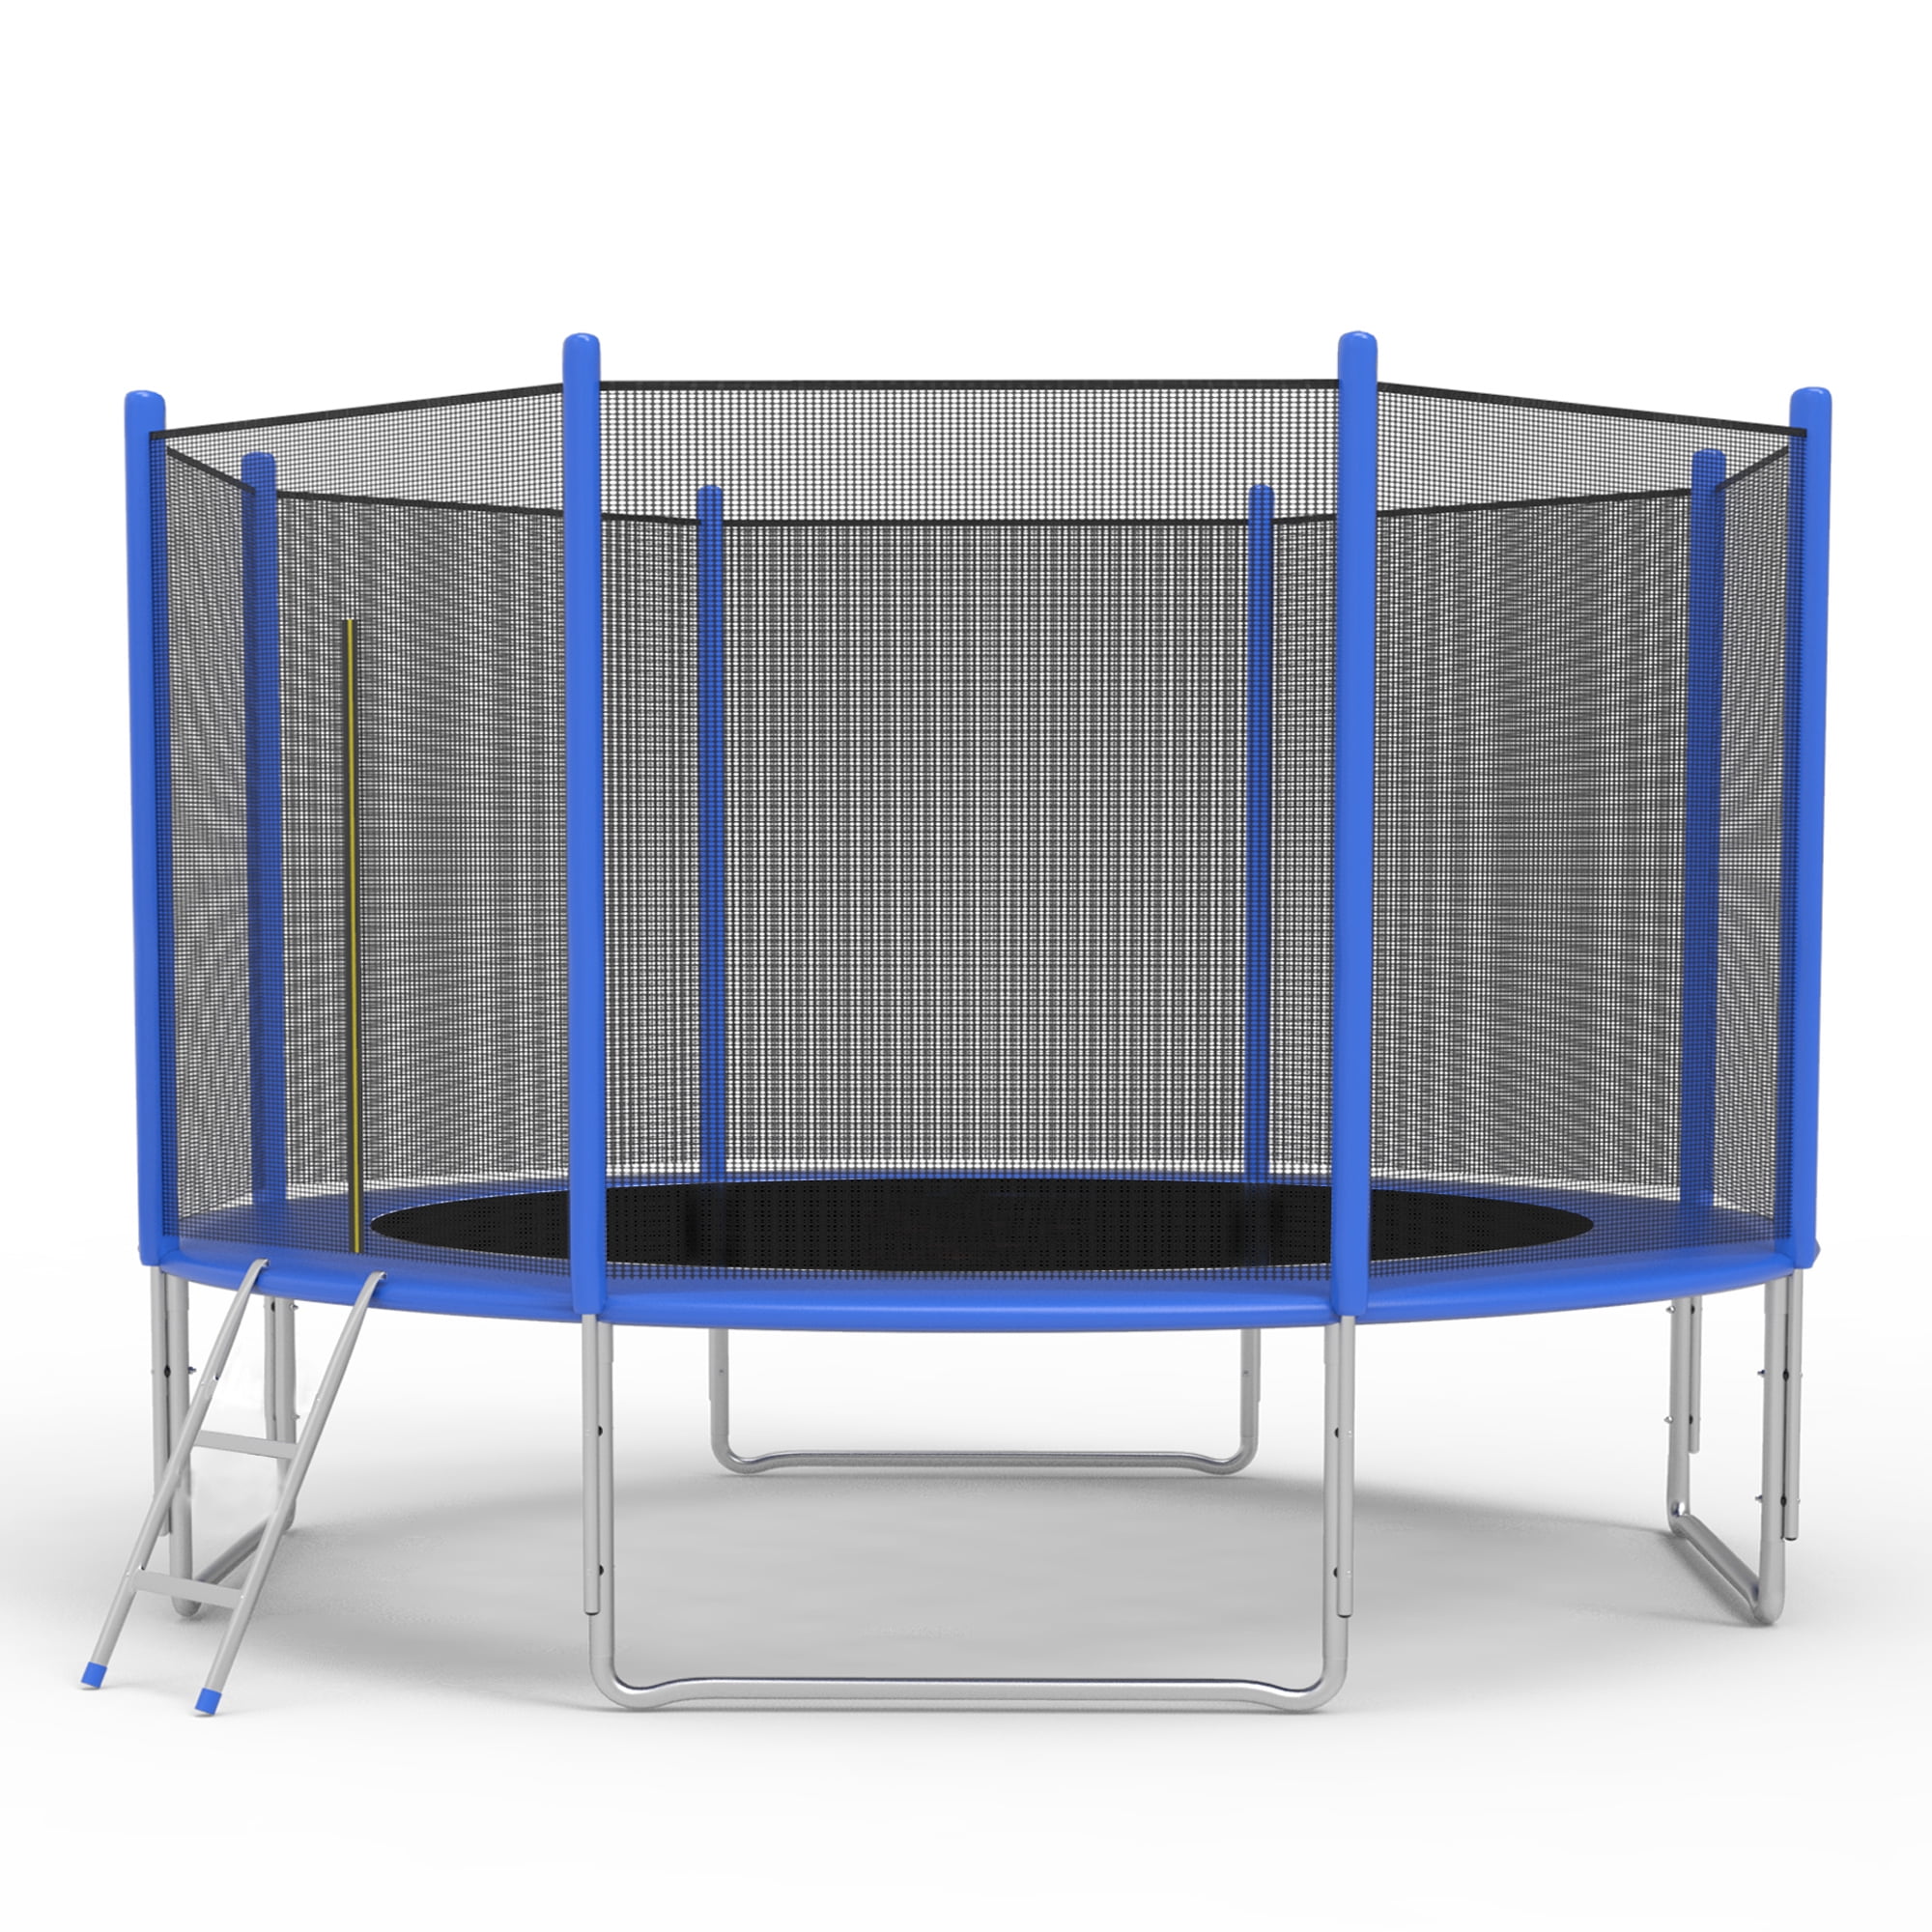 New 12FT Trampoline Combo Bounce Jump Safety Enclosure Net w/Spring Pad Ladder 